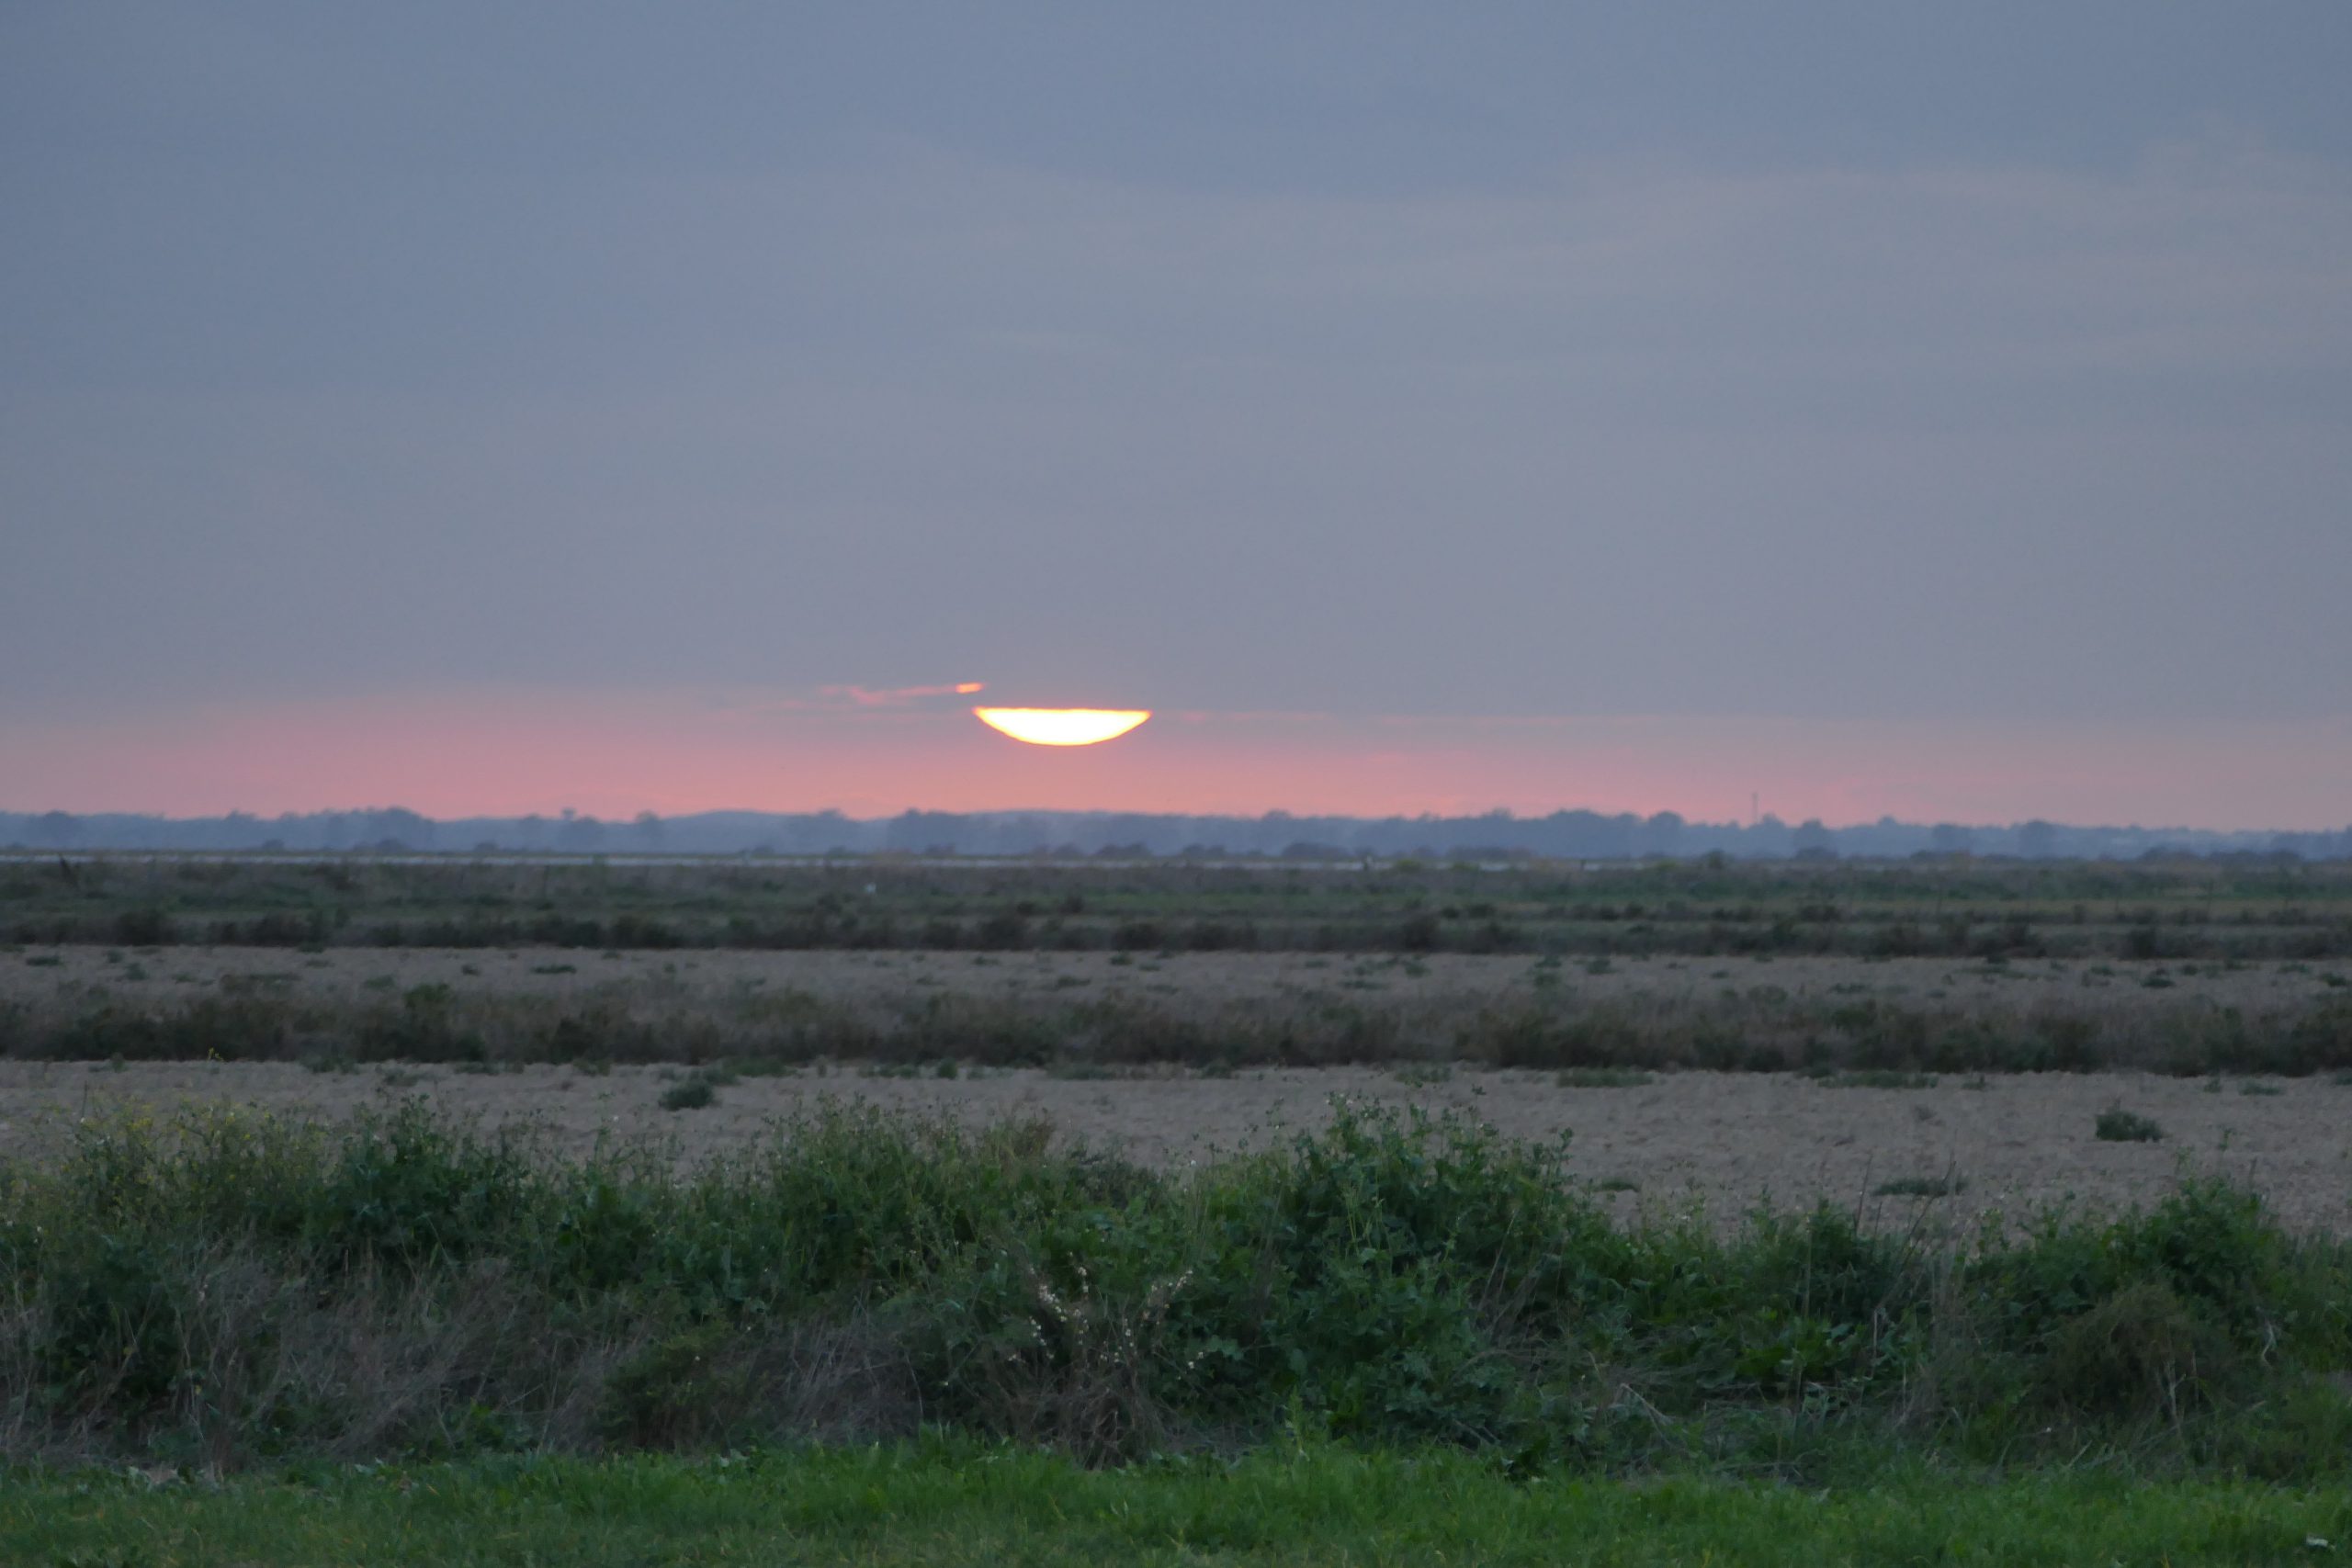 Northern Doñana: birdwatching spots within reach of Seville